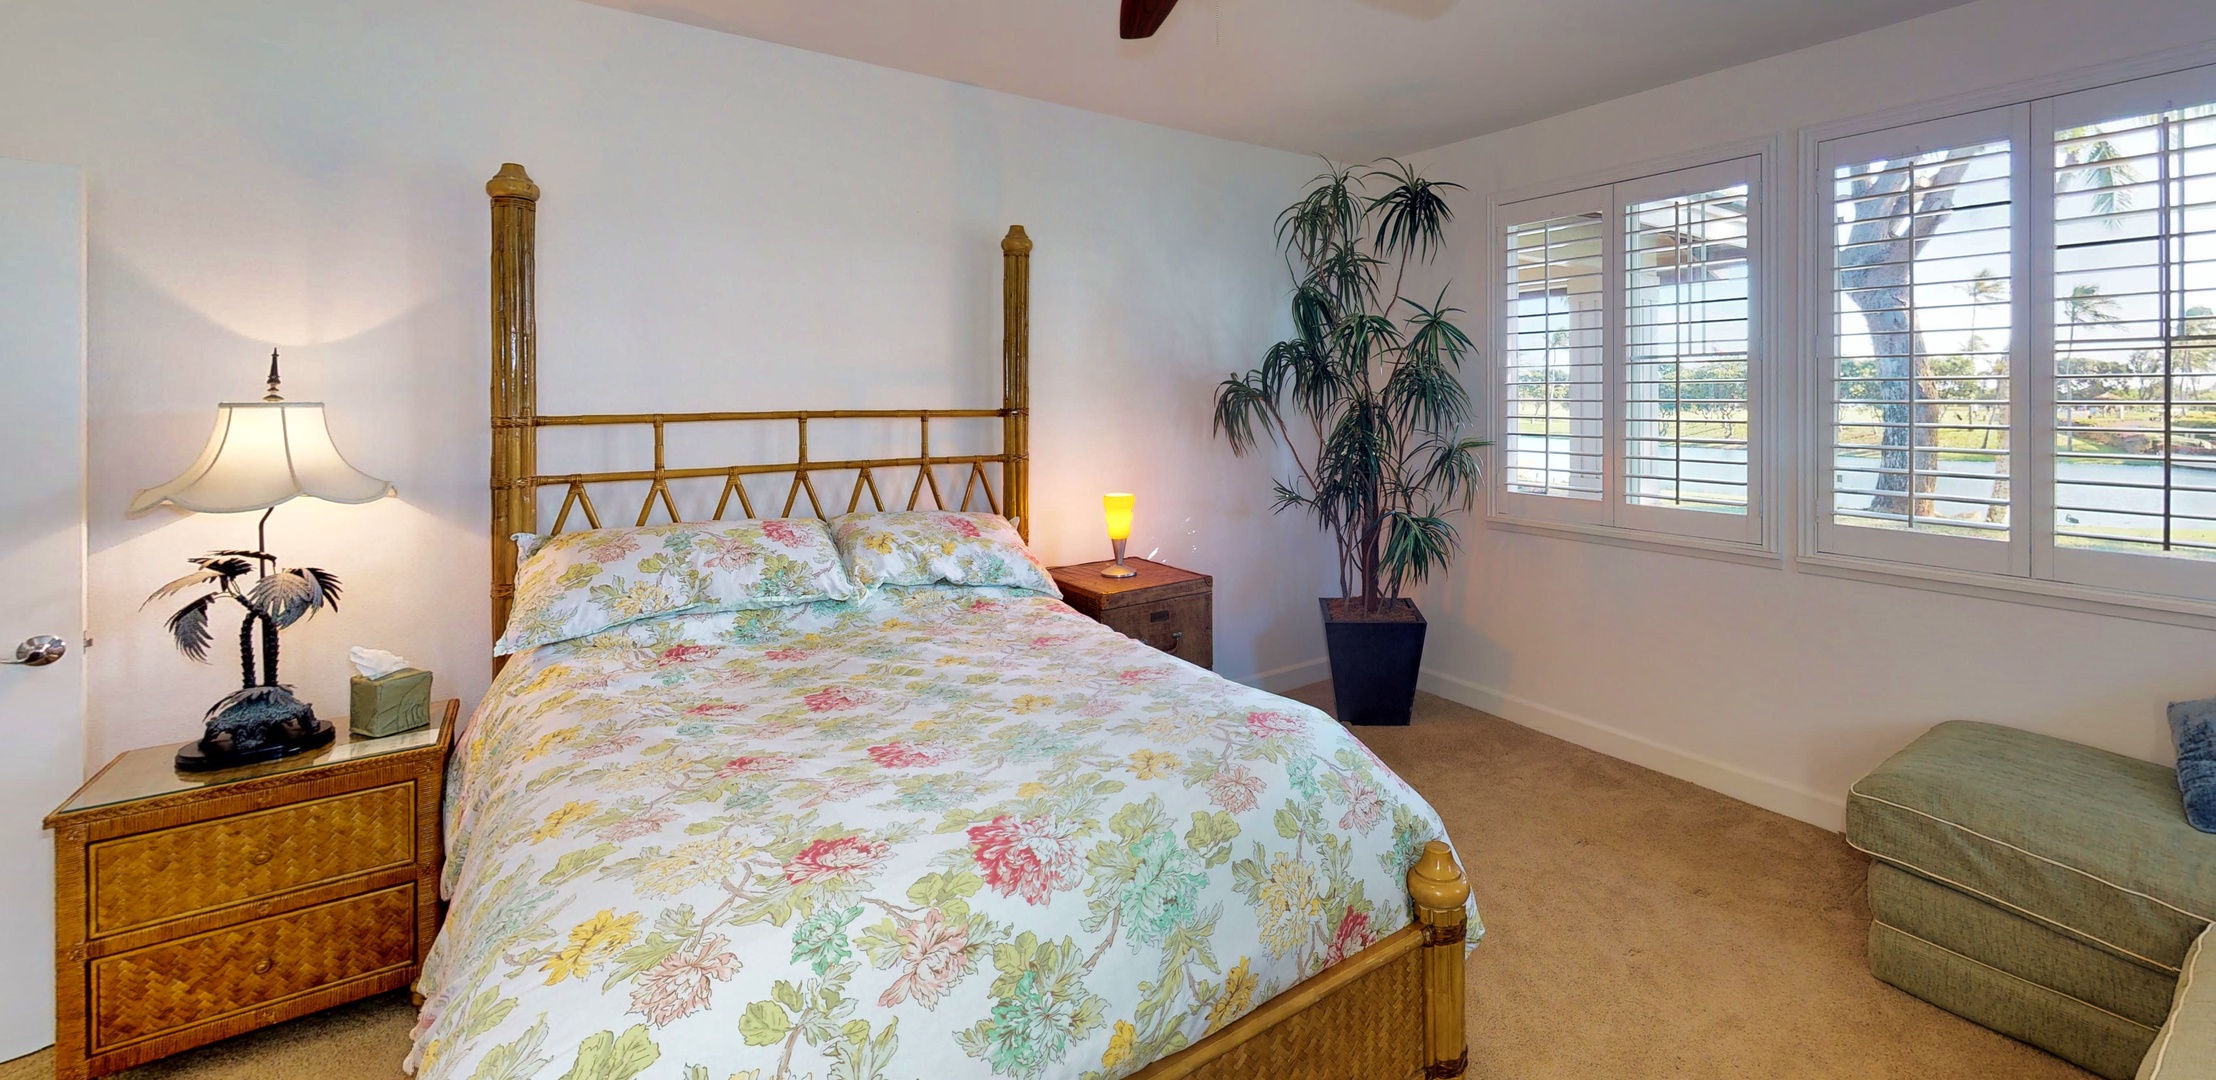 Kapolei Vacation Rentals, Ko Olina Kai Estate #17 - The primary with a king bed clothed in fine linens.